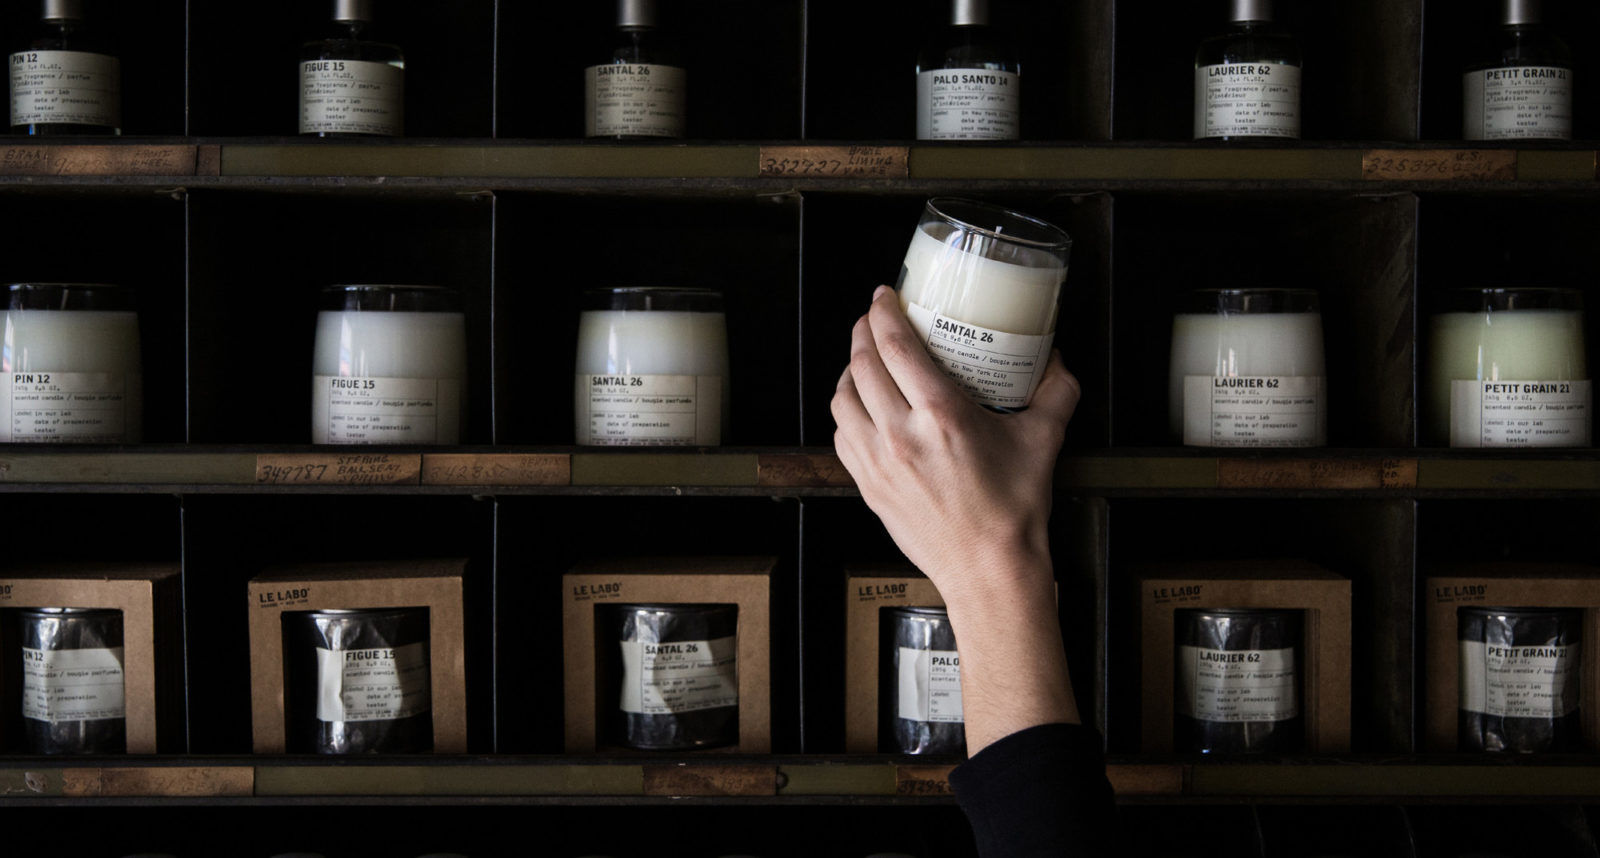 The best scented candles to light up your home and calm your inner turmoil